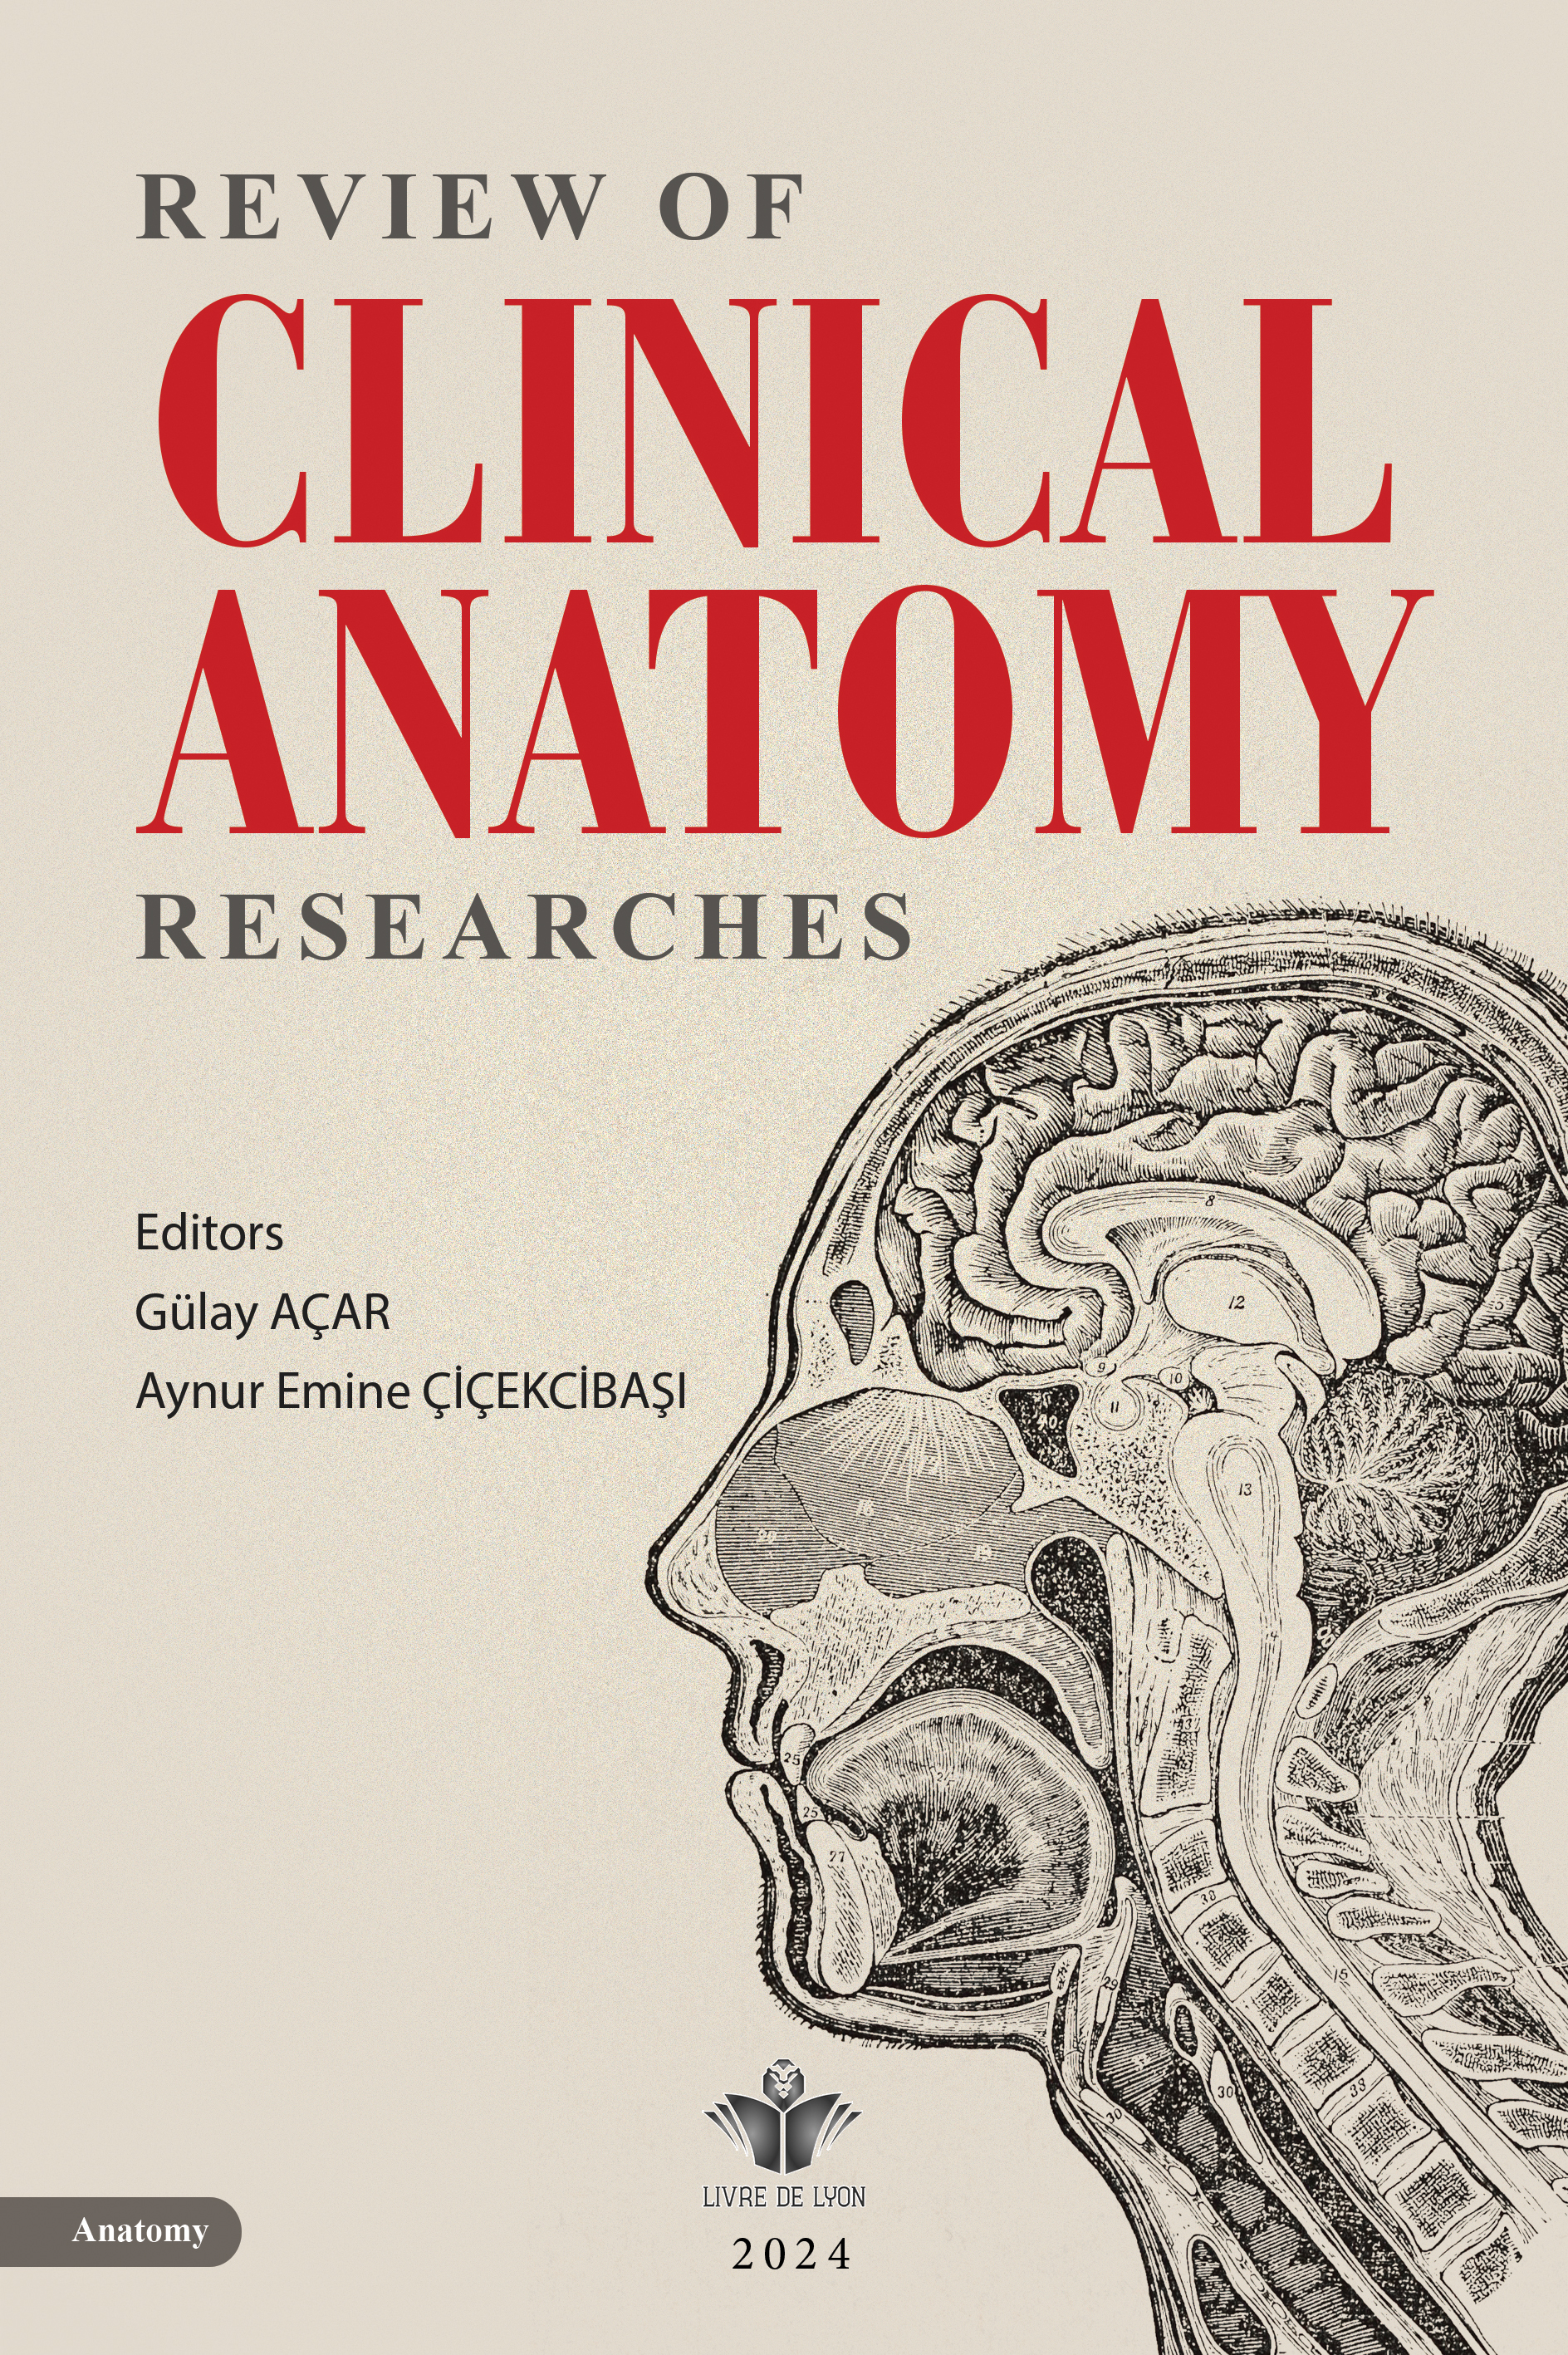 Review of Clinical Anatomy Researches